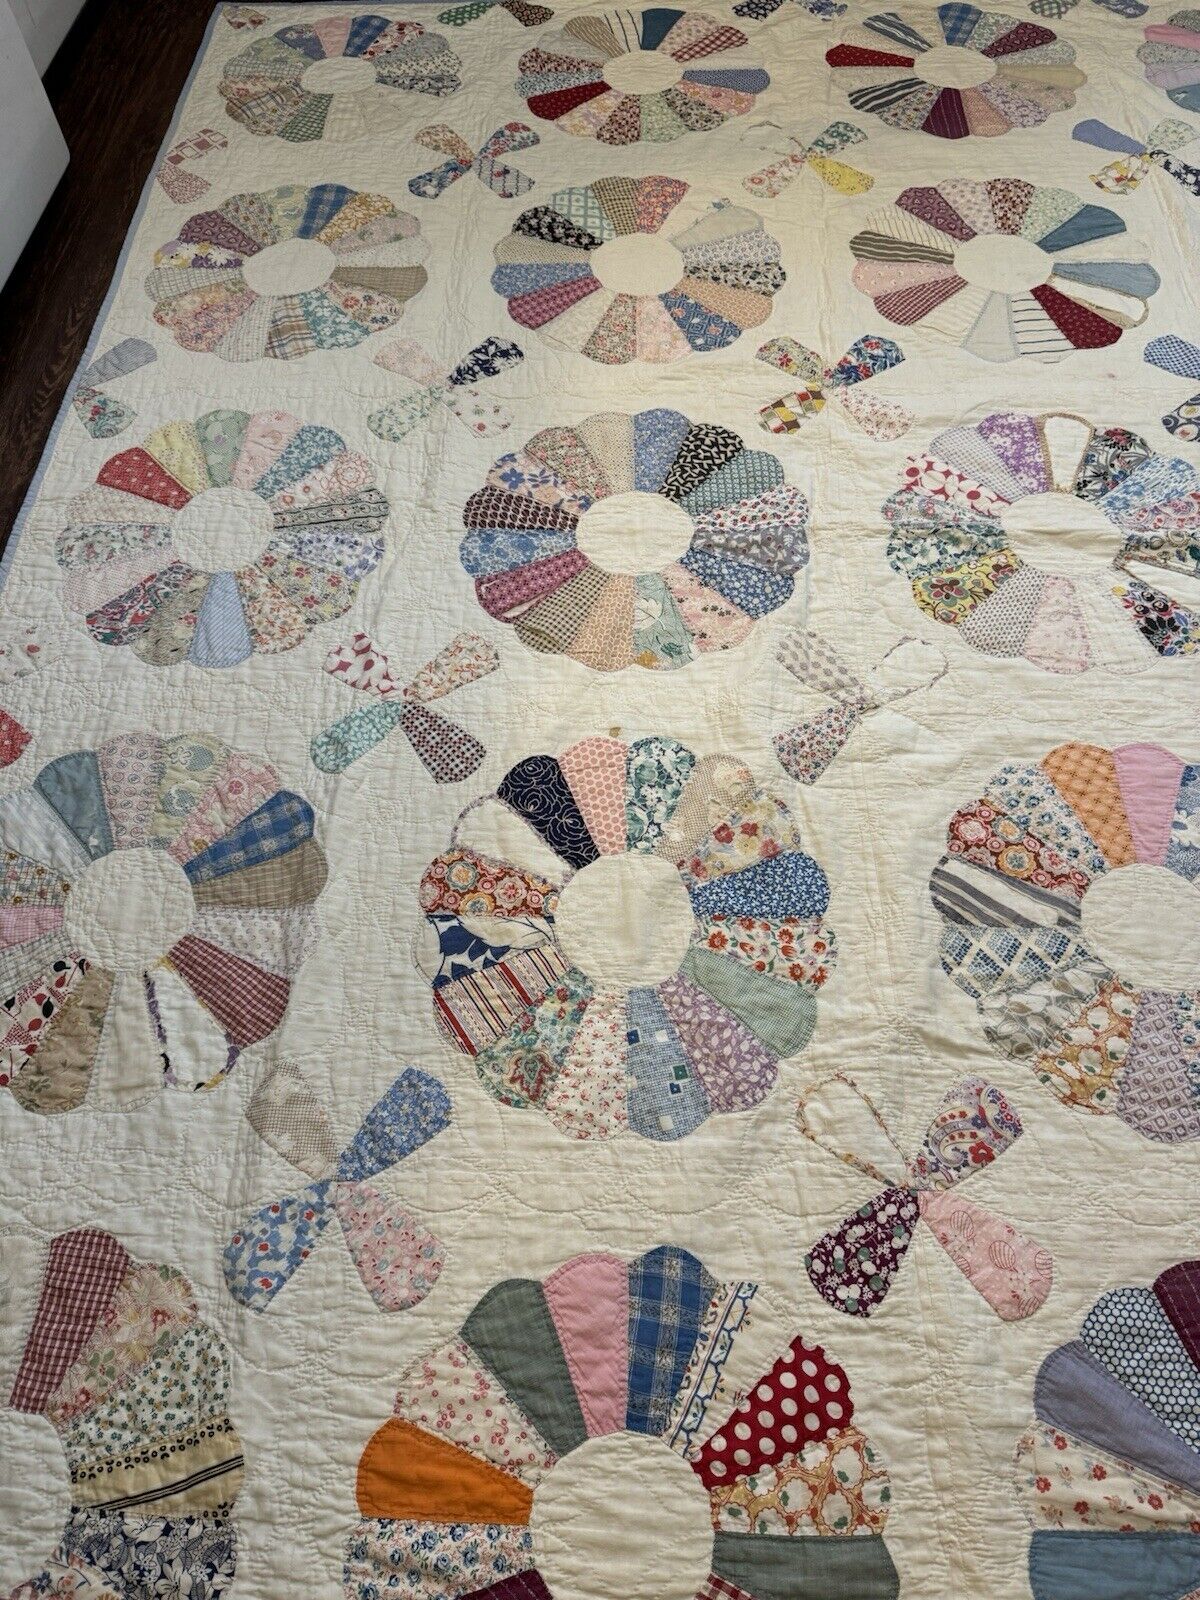 Vintage Made Dresden Plate Quilt Hand Stitched Cotton Thin 66✖️82